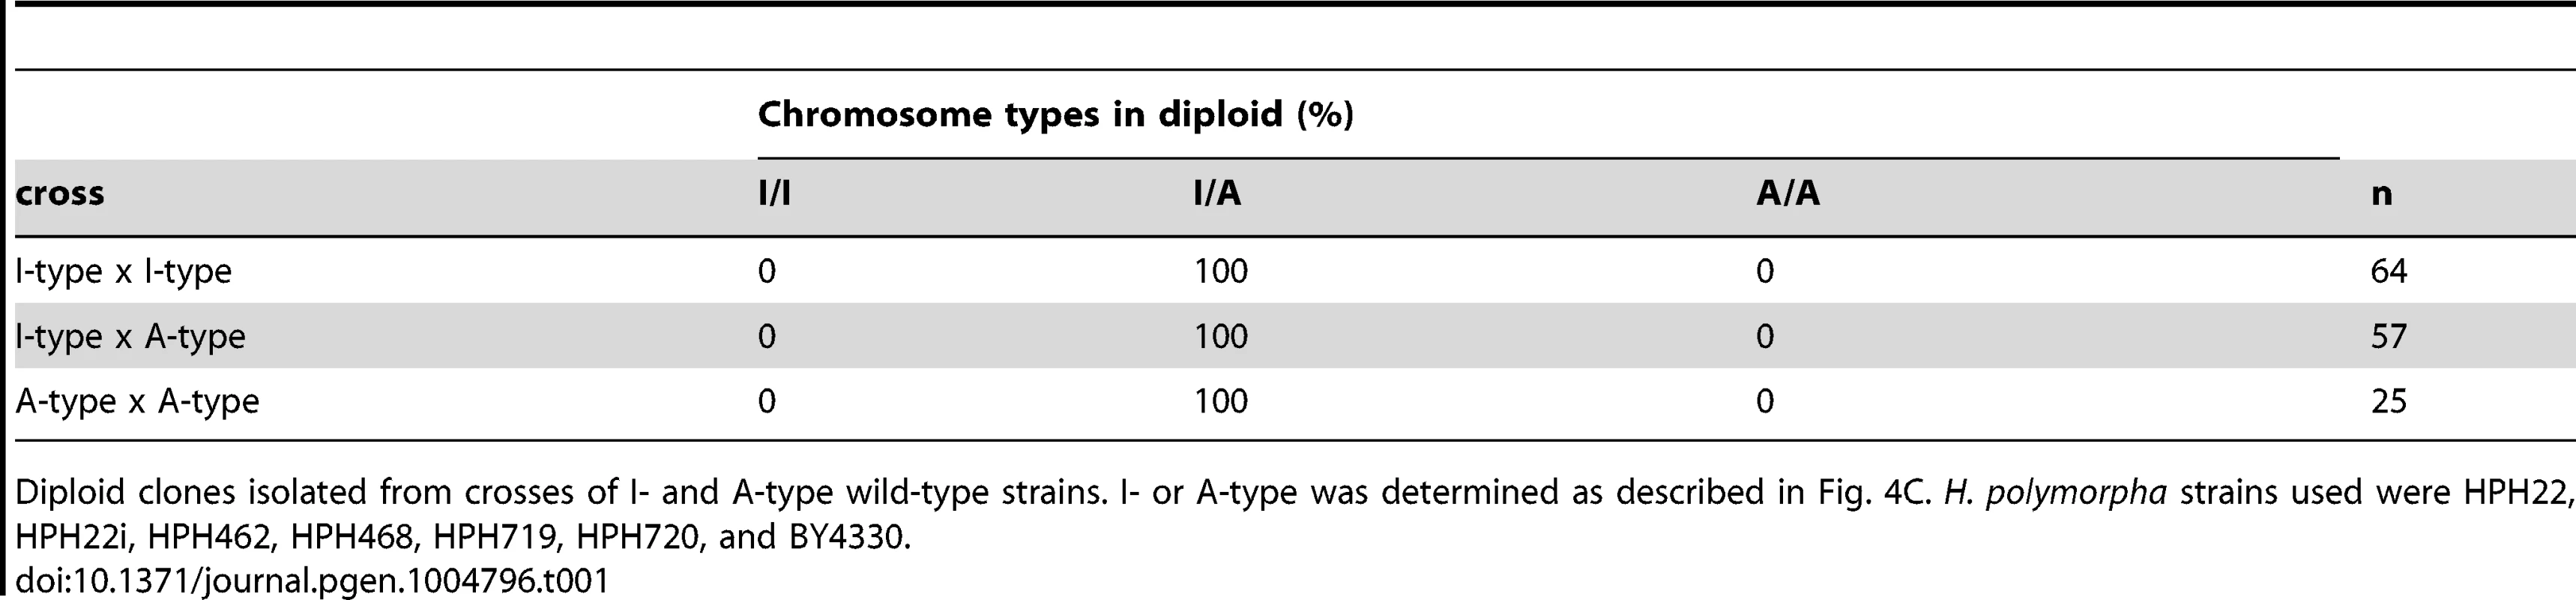 Chromosome type in diploid isolates.